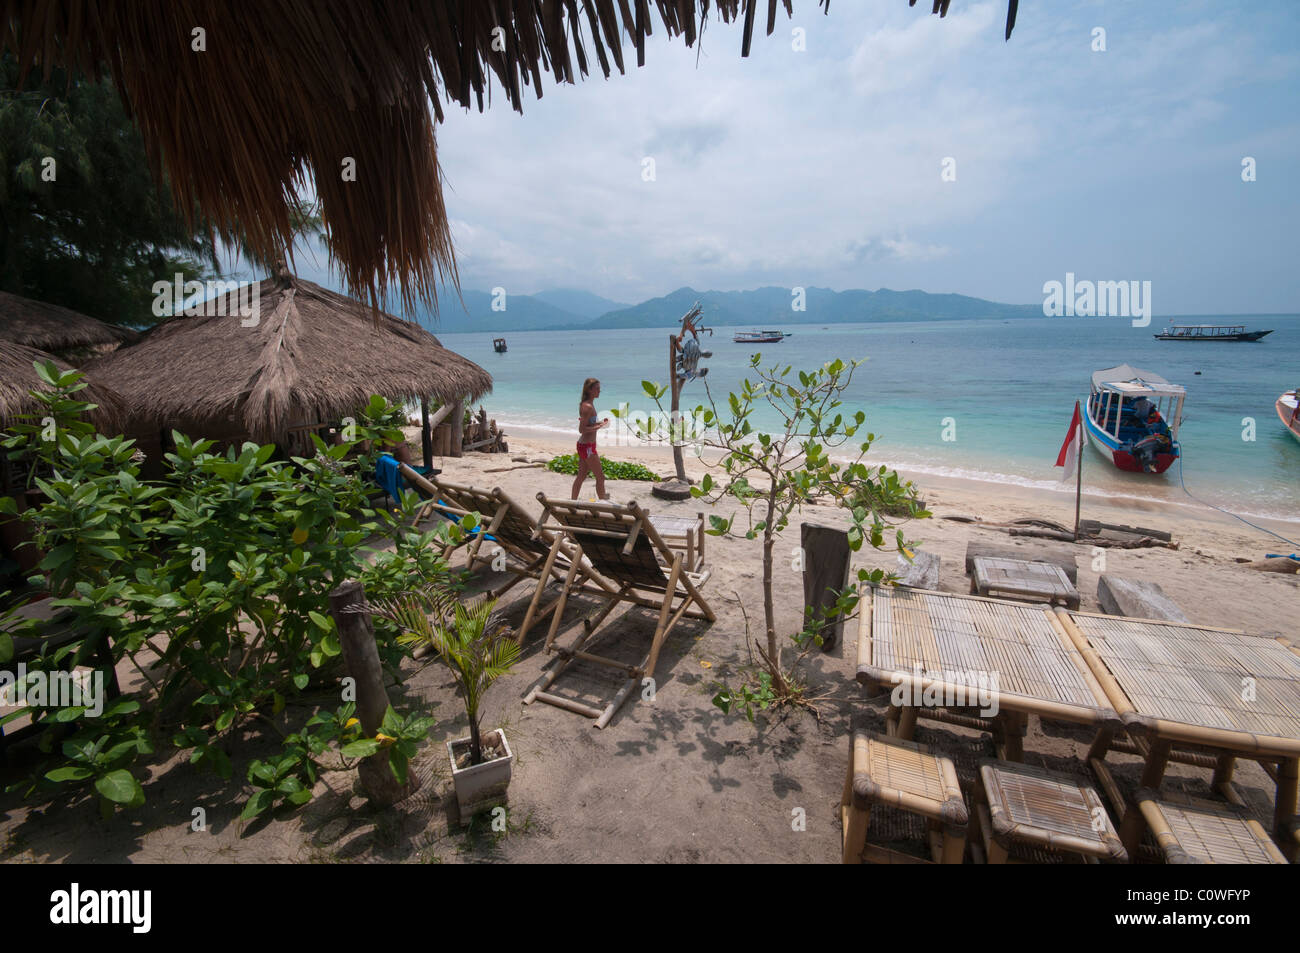 Beach at Gili Air the smallest island of the Gili group off Lombok Indonesia Stock Photo